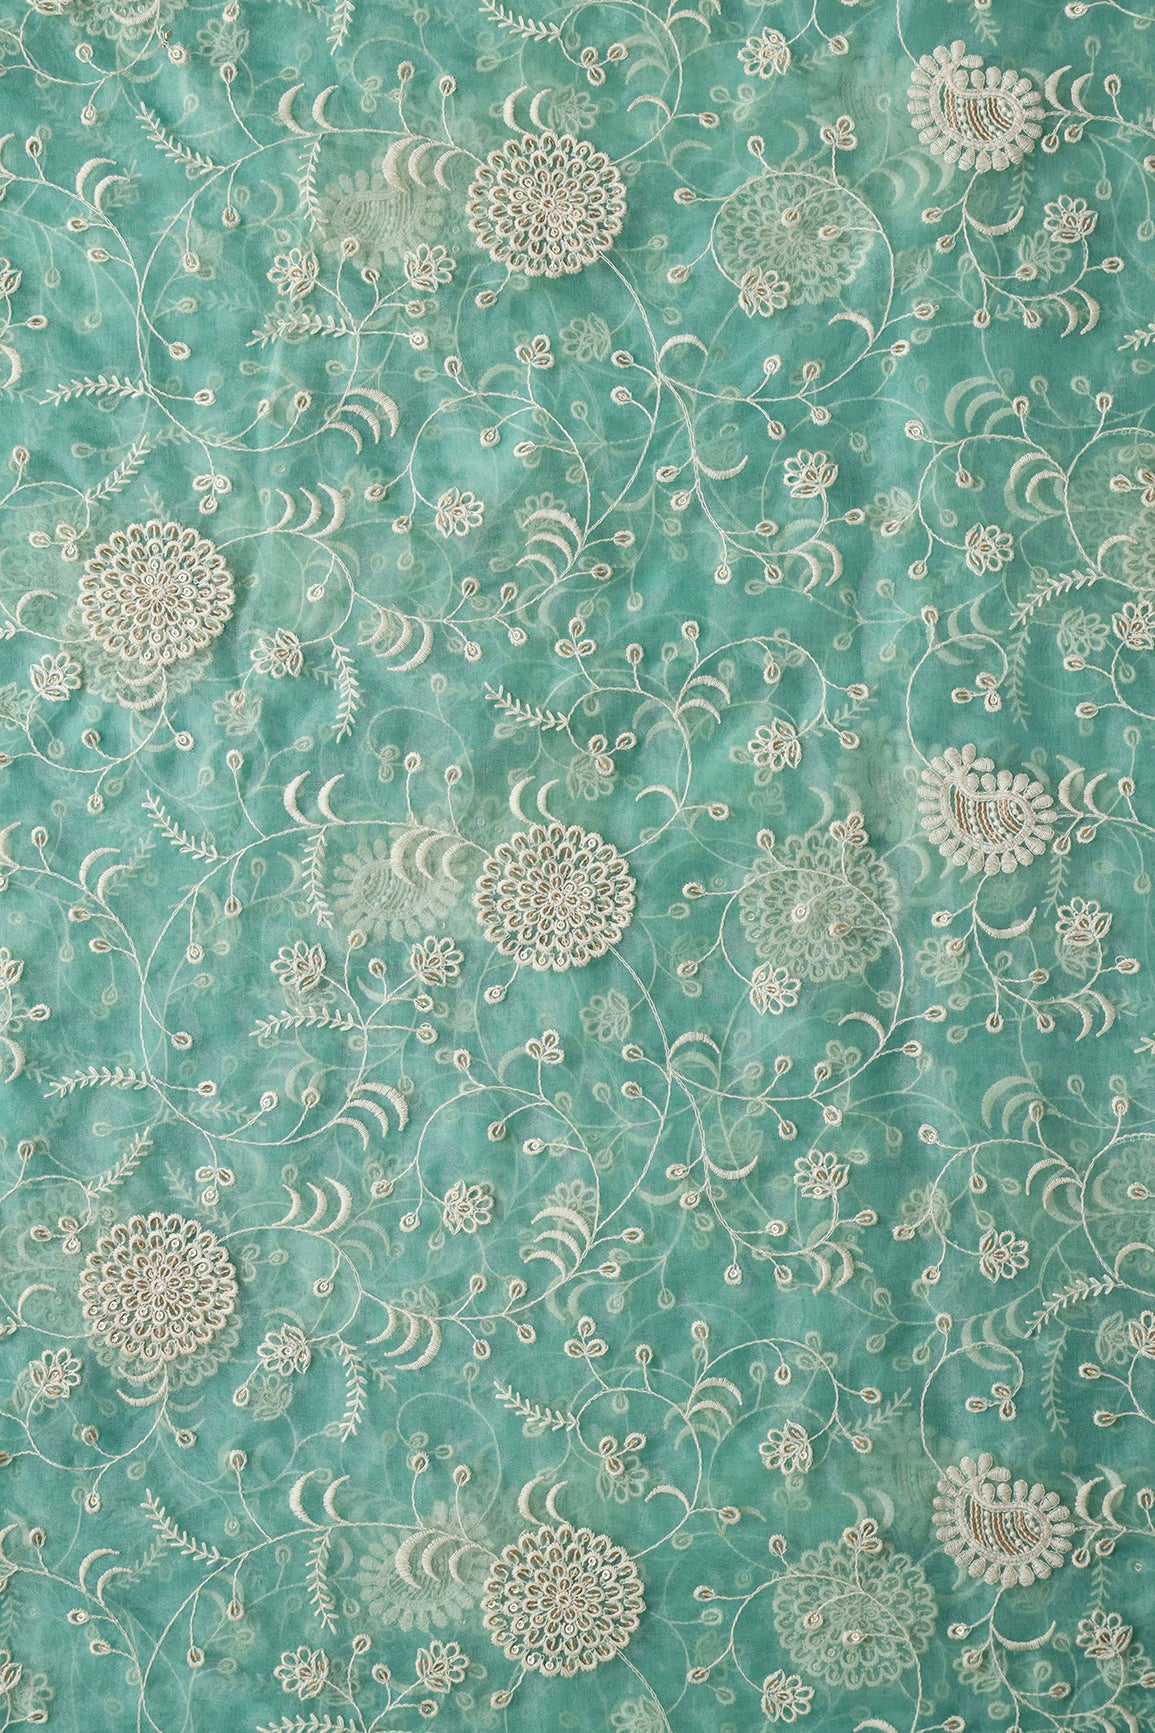 Exclusive Gold Matte Sequins With White Thread Floral Embroidery On Teal Organza Fabric